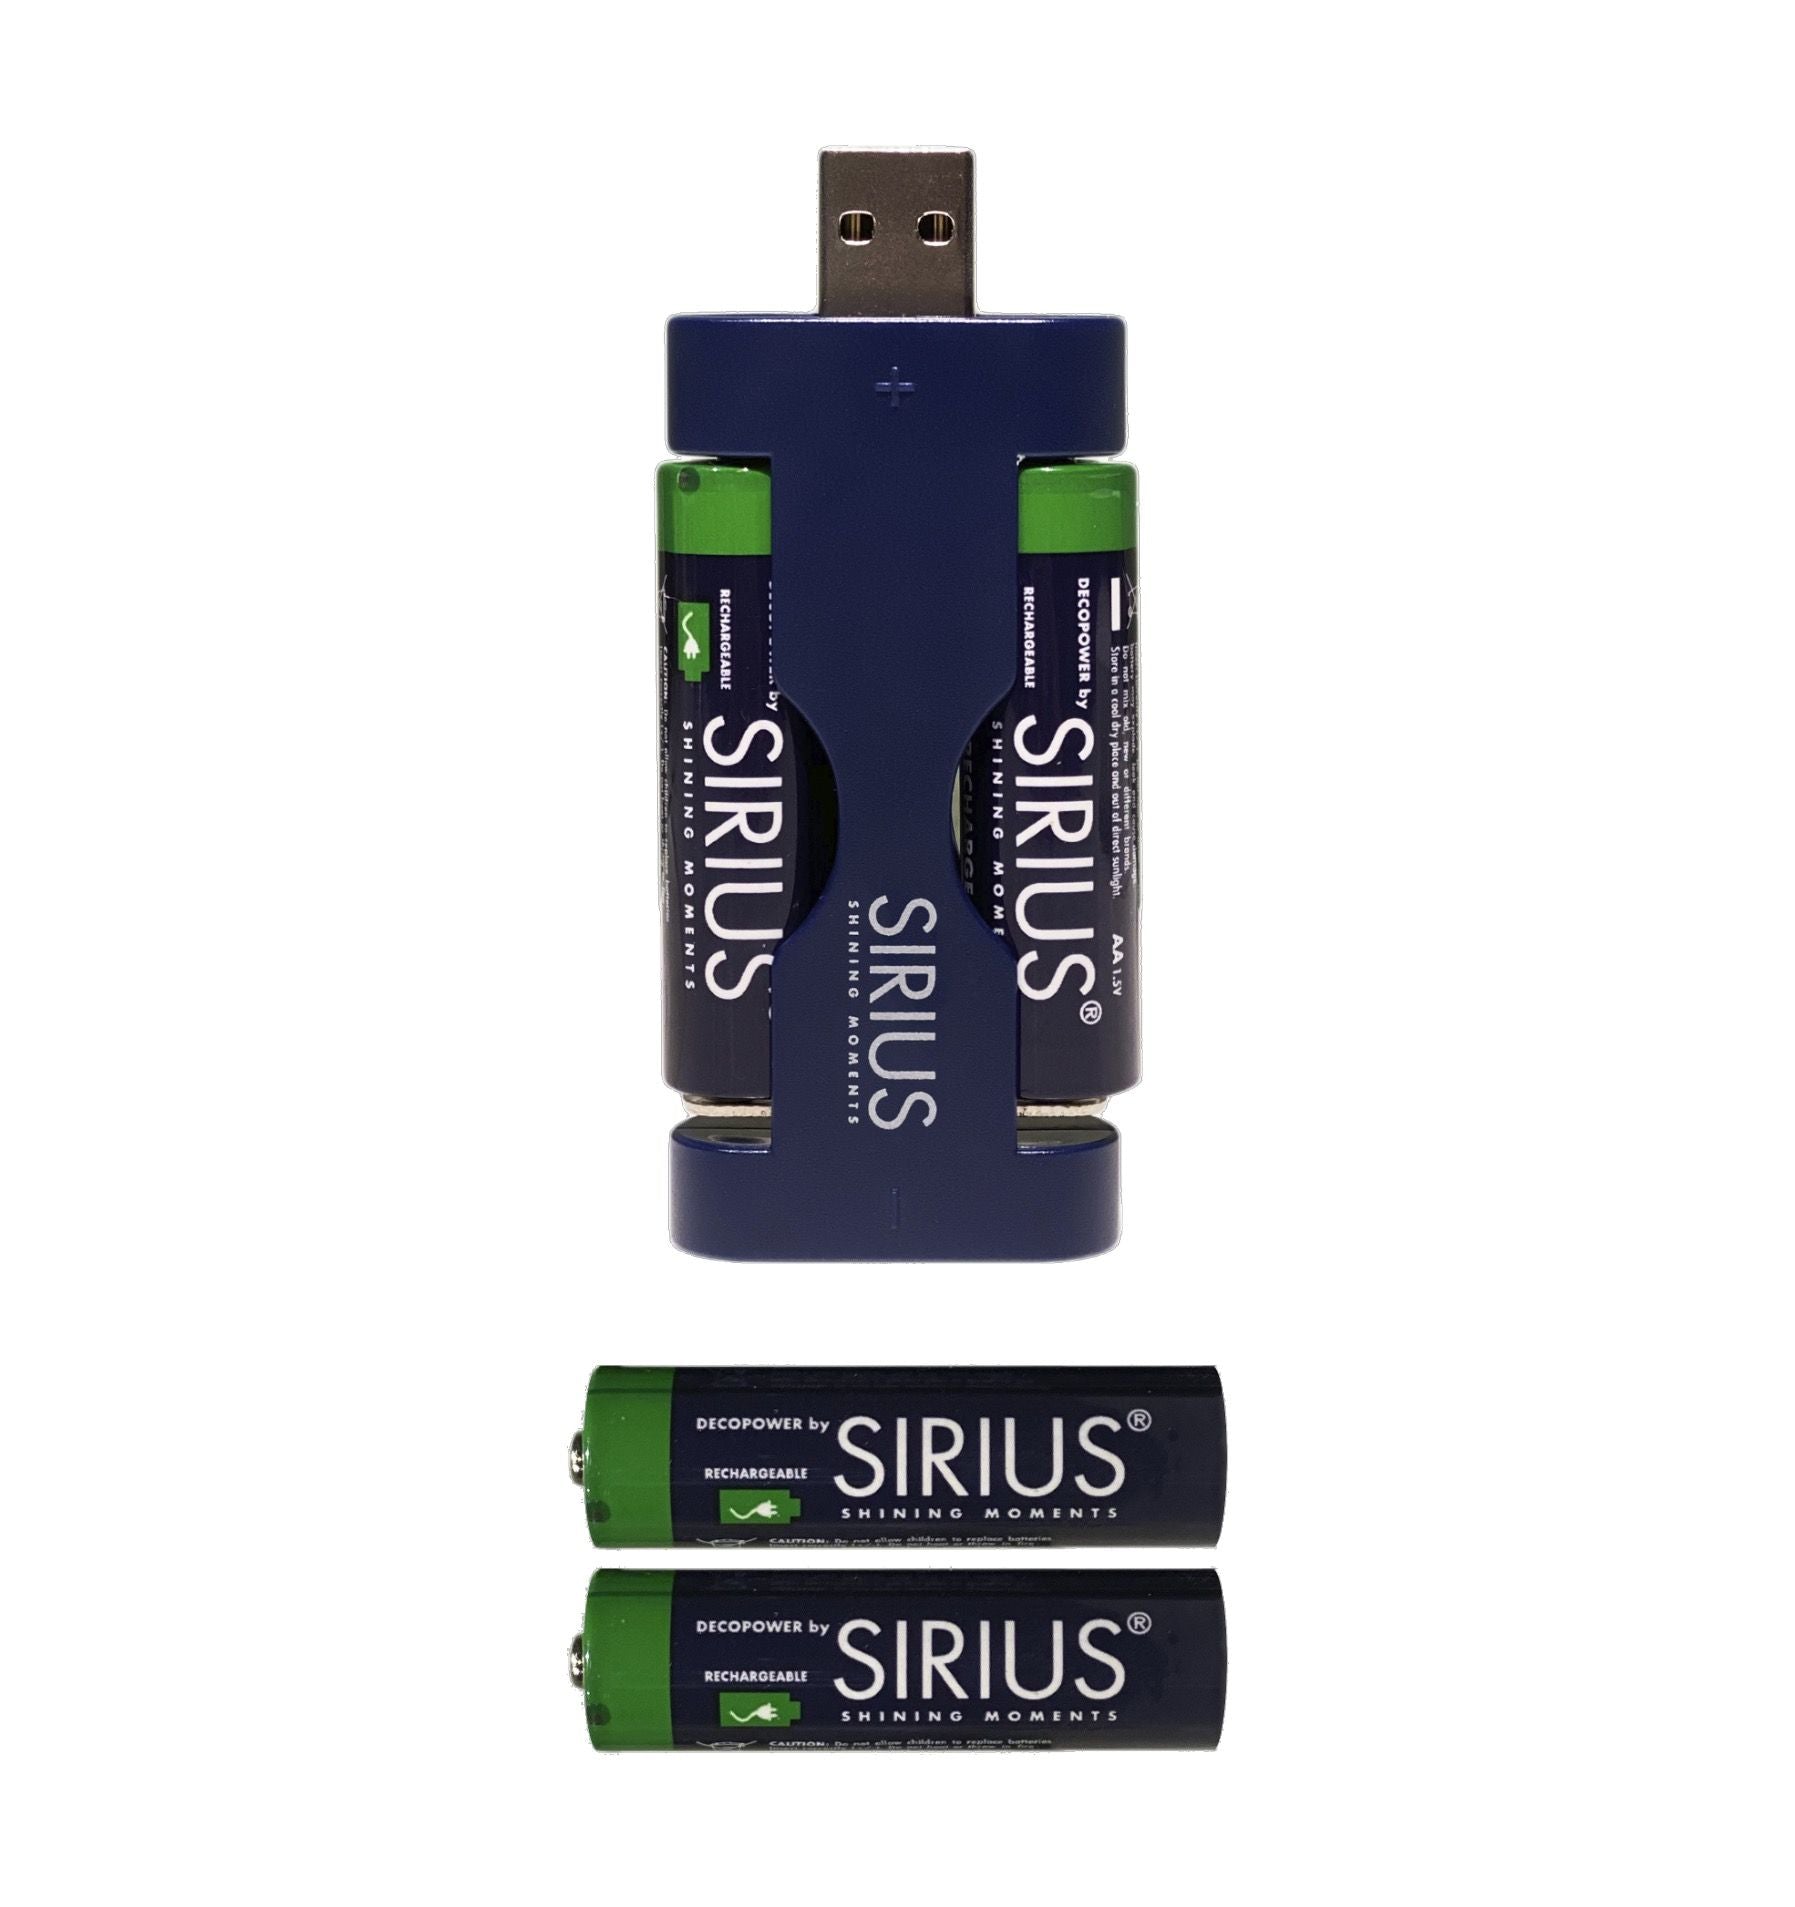 Sirius déco Power USB Charger incl. 4x batteries rechargeables AA